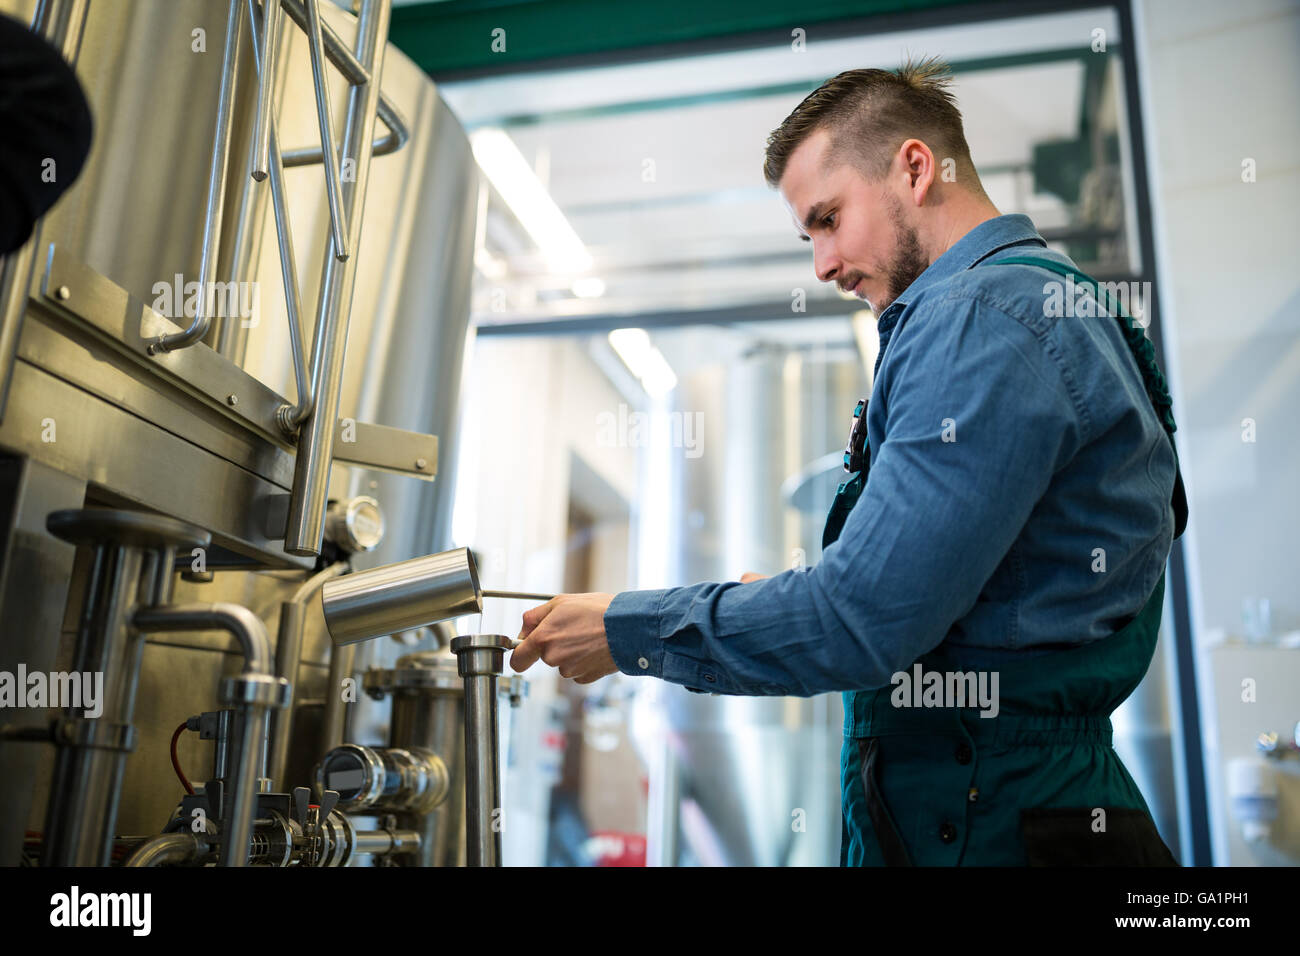 Brewer checking beer at brewery Stock Photo